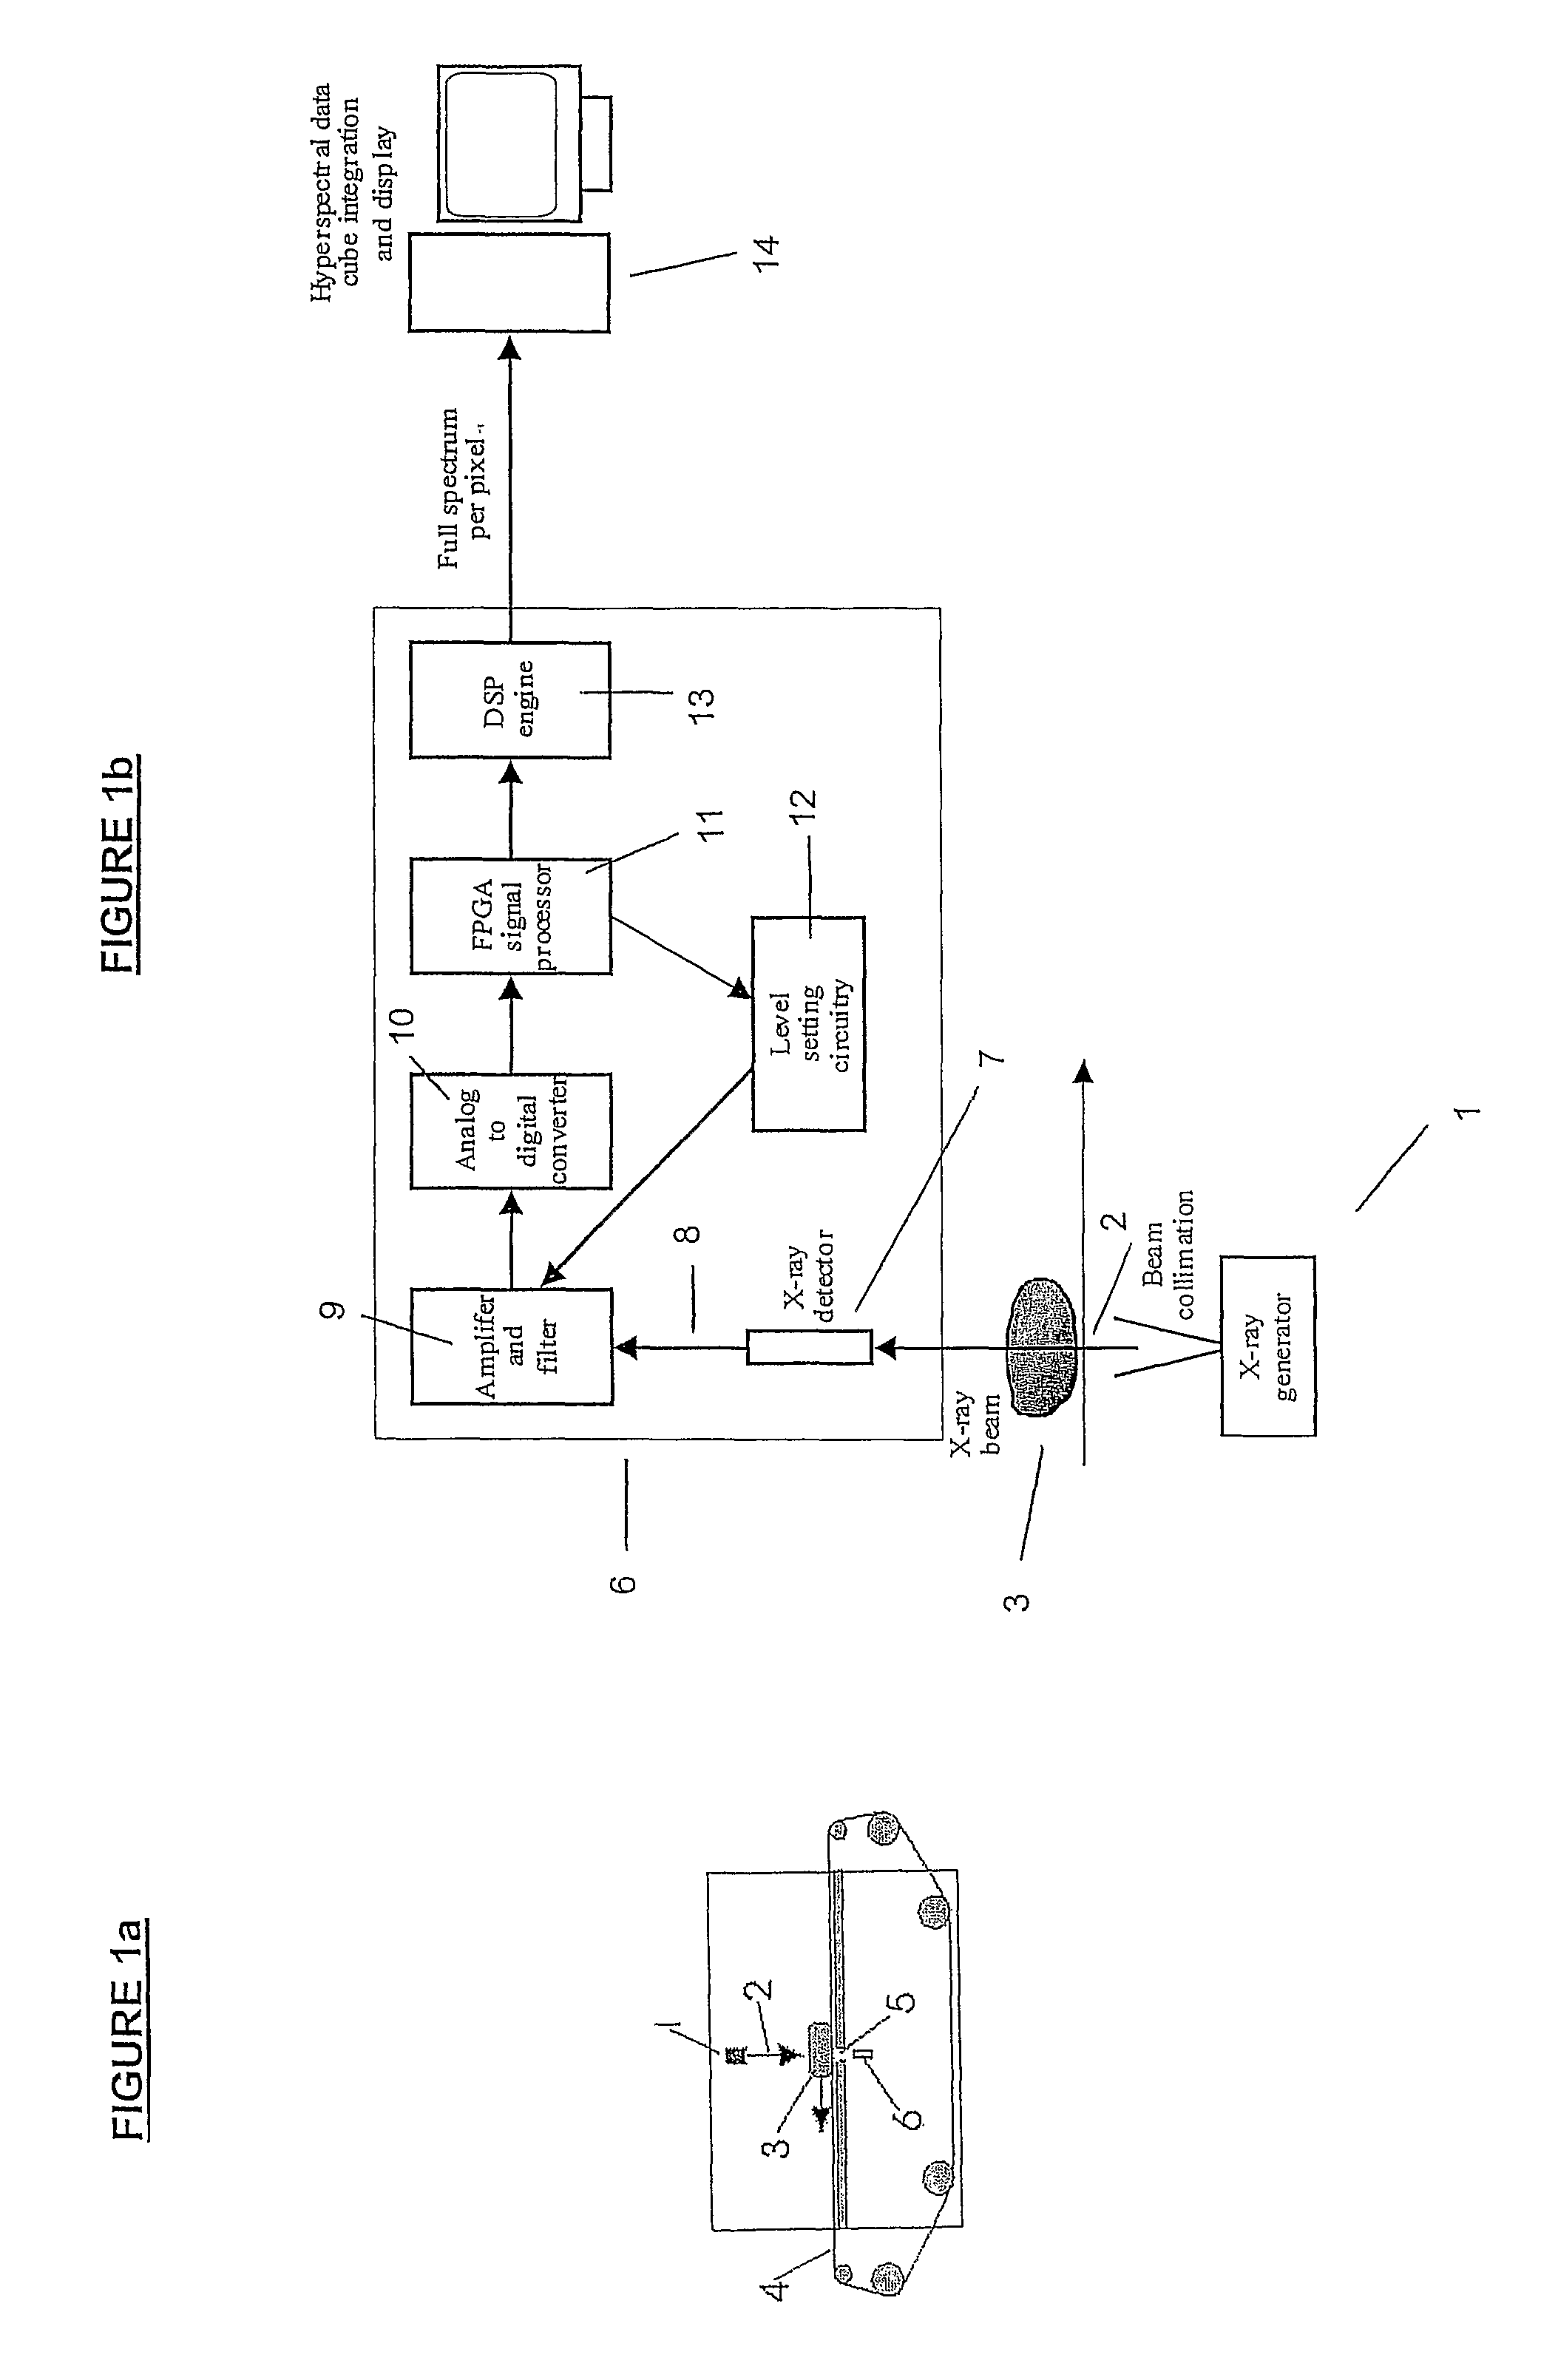 Target composition determination method and apparatus